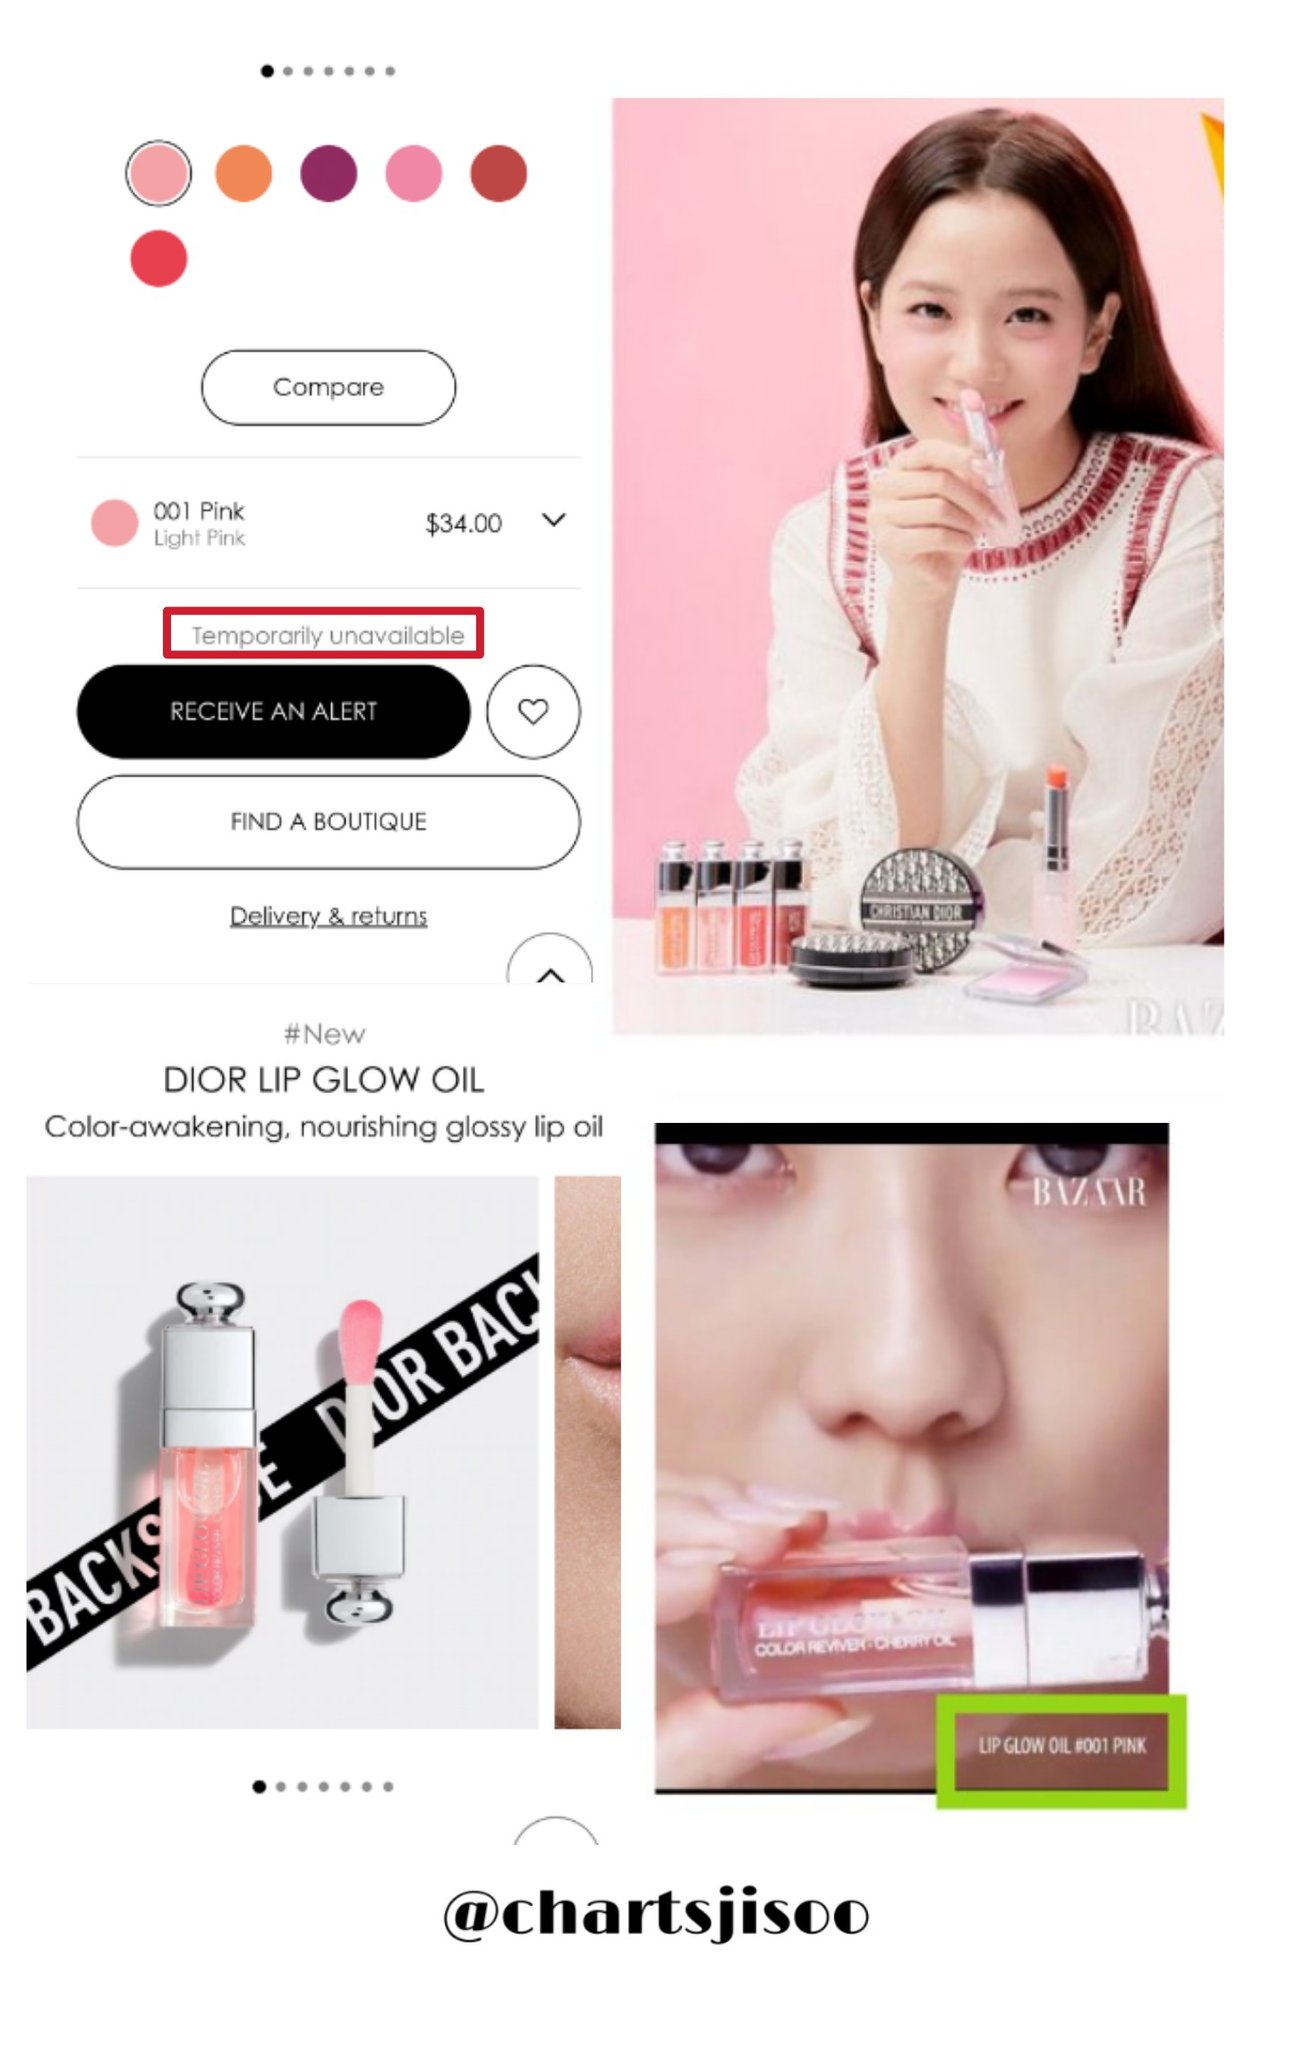 Twitter  KIM JISOO CHARTS على تويتر JISOOs Lip Glow oil 001 Pink is  SOLD OUT again in Dior website US site After they Restock Dior 블랙핑크  지수 블랙핑크 지수 JISOO KIMJISOO 